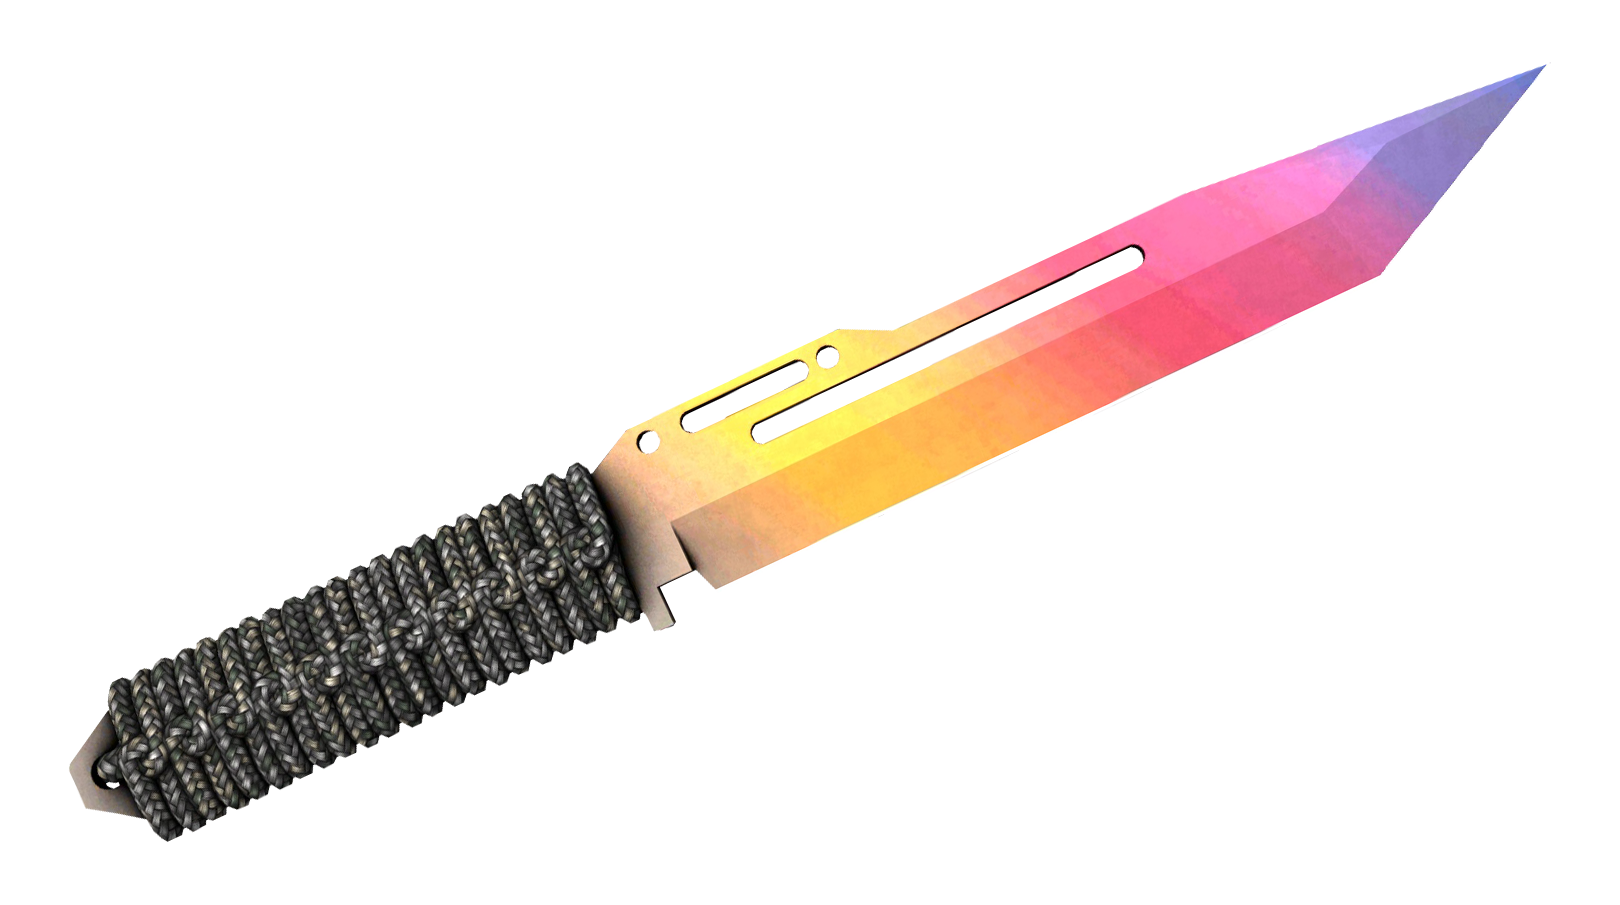 Paracord Knife Fade Large Rendering